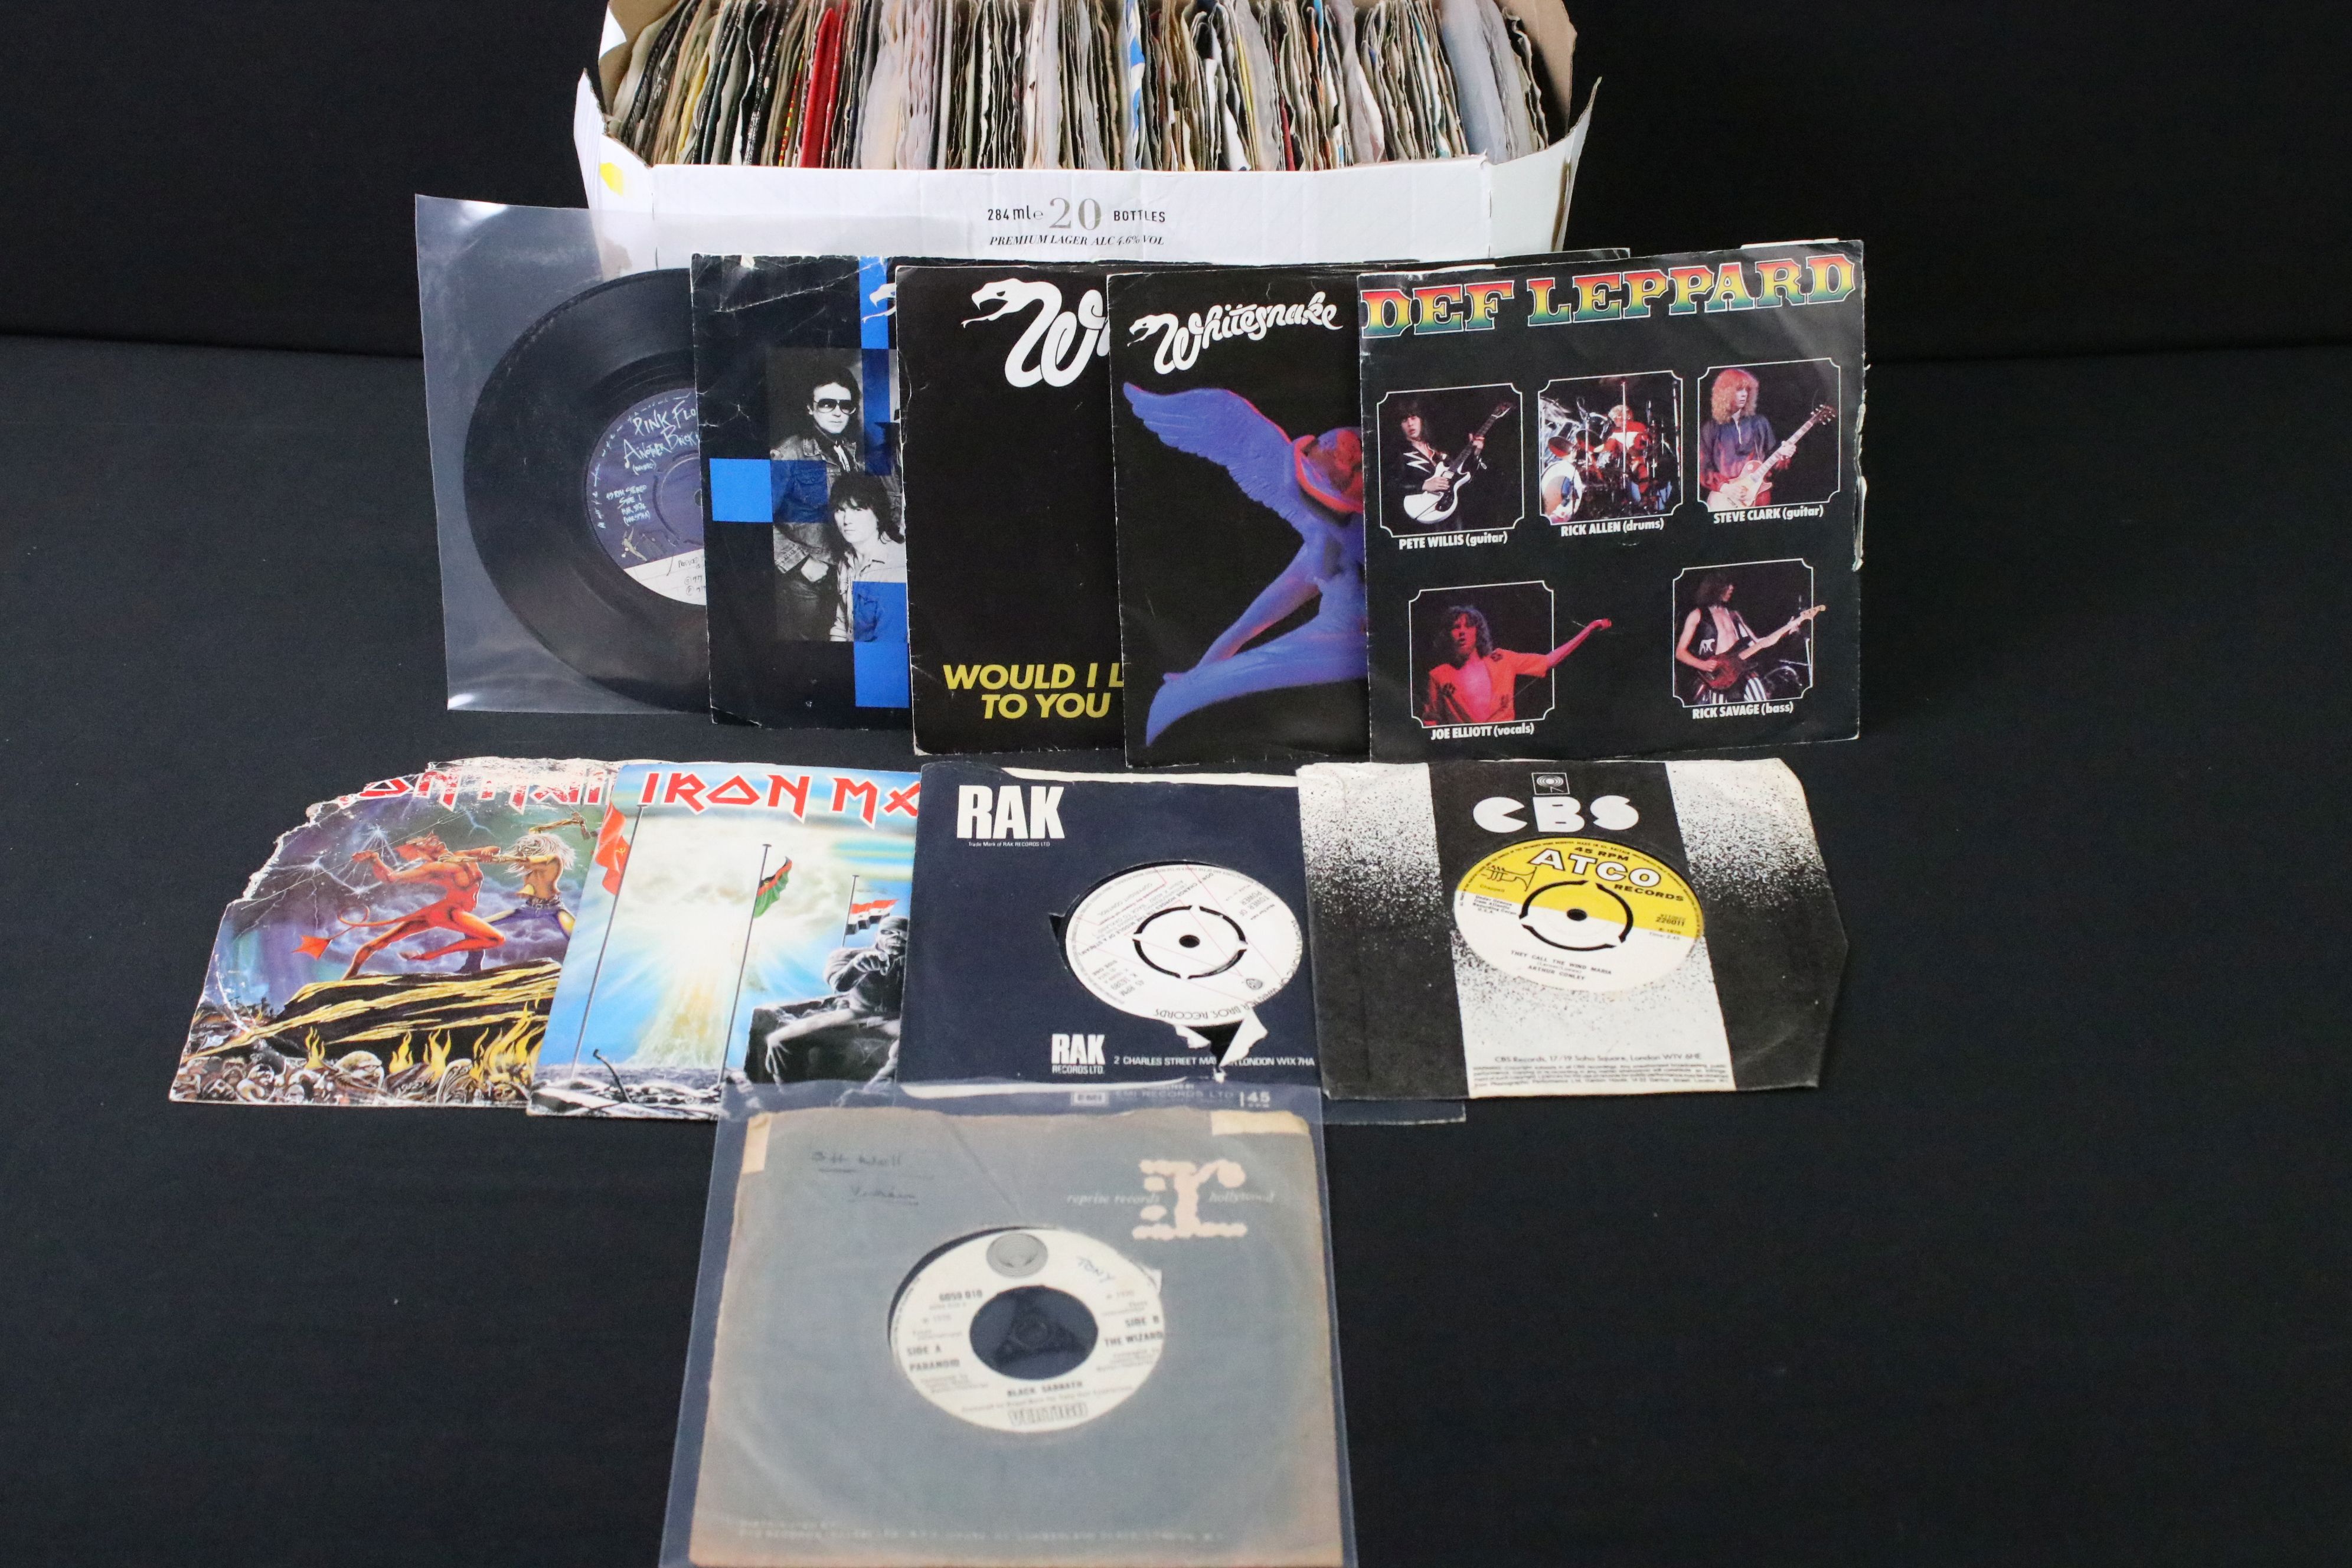 Vinyl - Over 100 1970s and 1980s 7” singles including Heavy Metal, New Wave and Soul and some